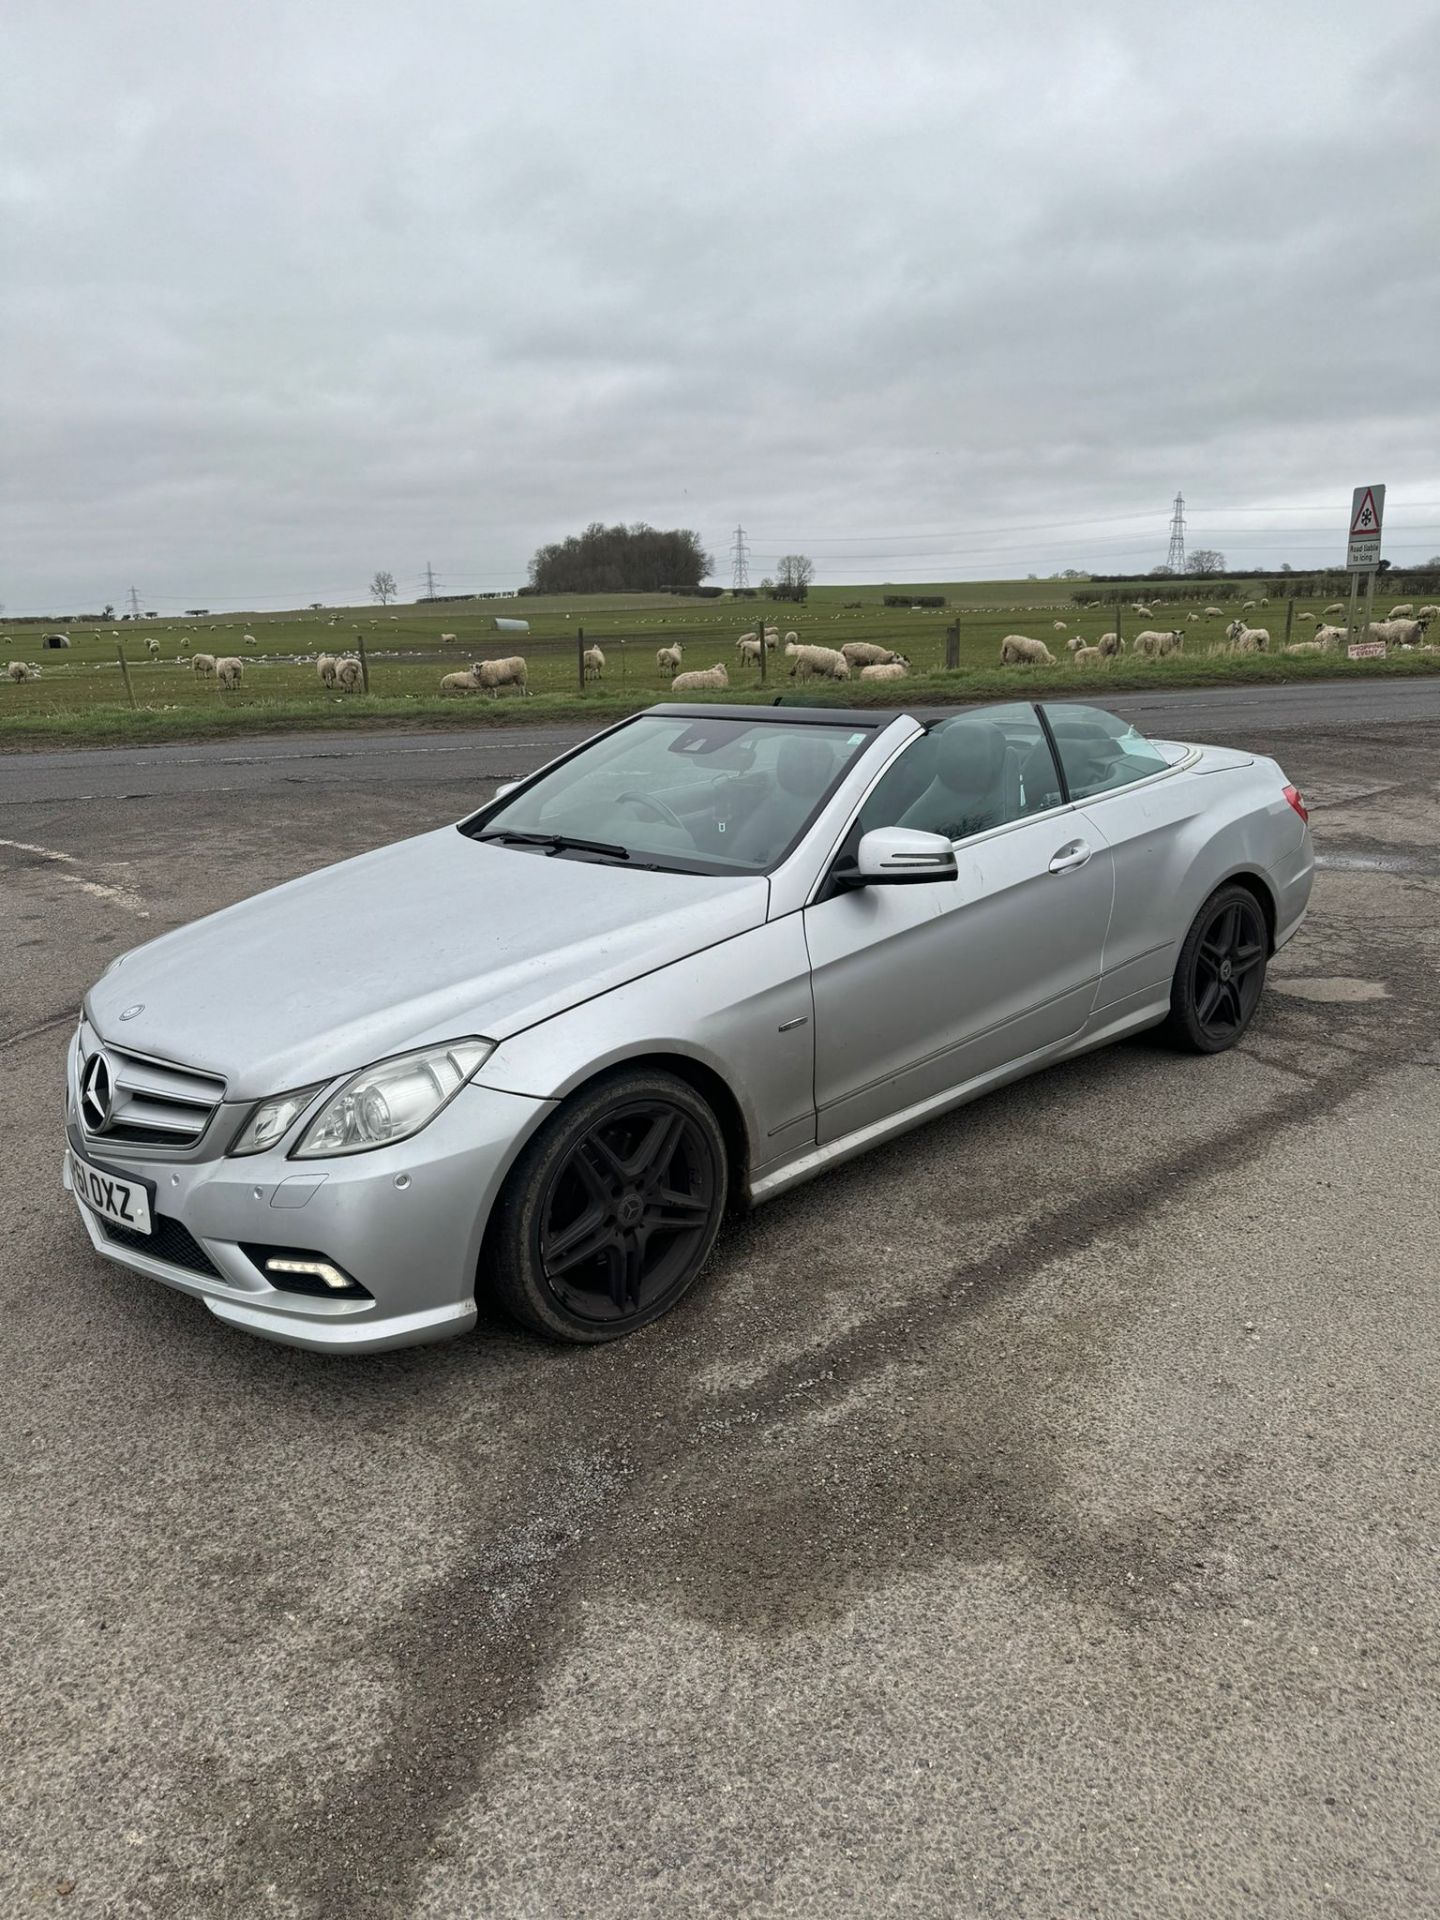 2011 61 MERCEDES E350 CONVERTIBLE - 75K MILES - 1 OWNER - Image 11 of 12